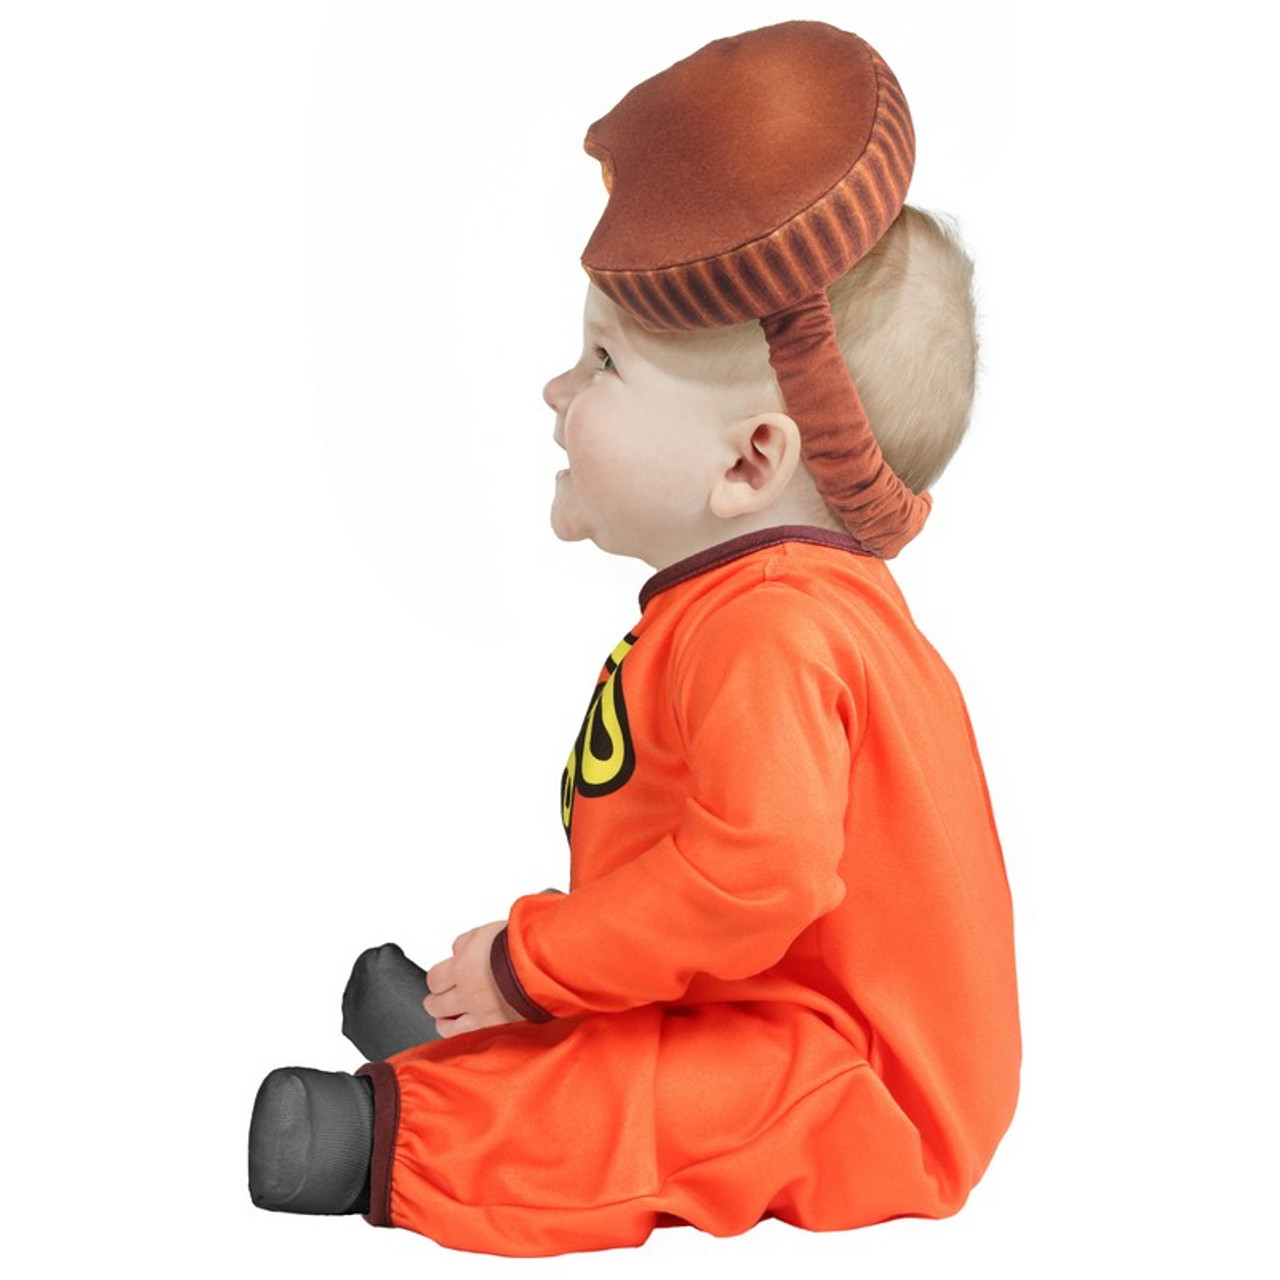 Reese's Peanut Butter Cup Infant/Toddler Costume Inset 2